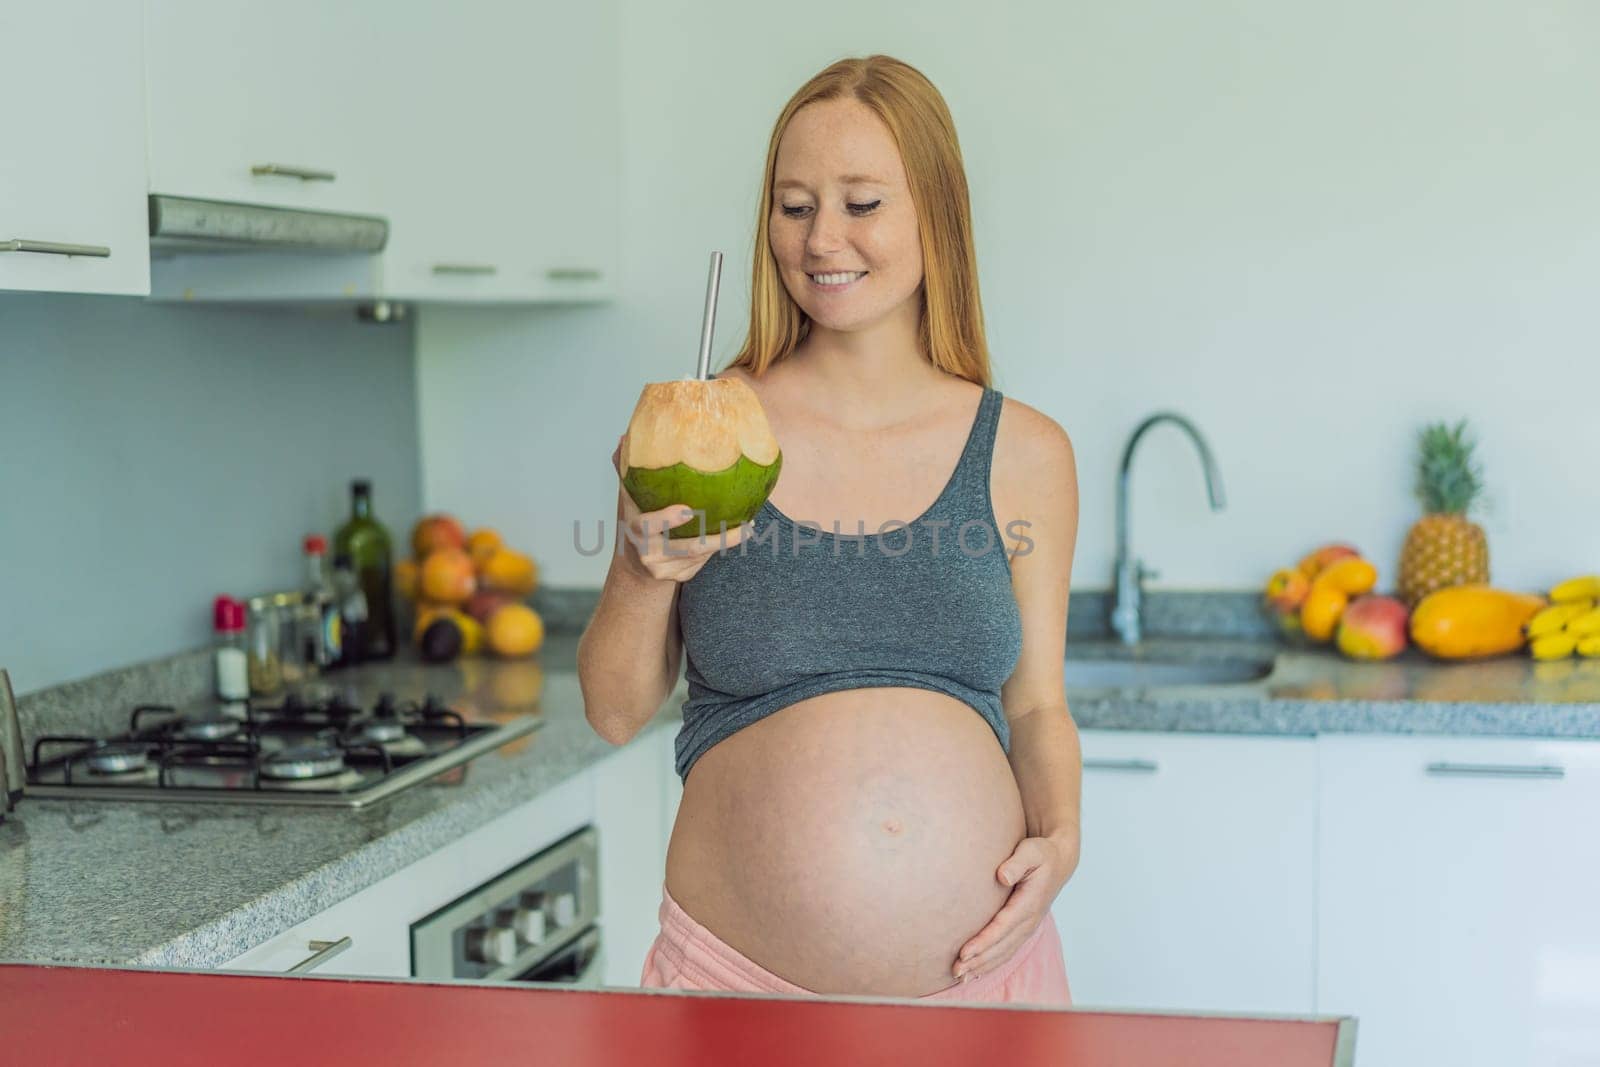 Quenching her pregnancy thirst with a refreshing choice, a pregnant woman joyfully drinks coconut water from a coconut in the kitchen, embracing natural hydration during this special journey by galitskaya